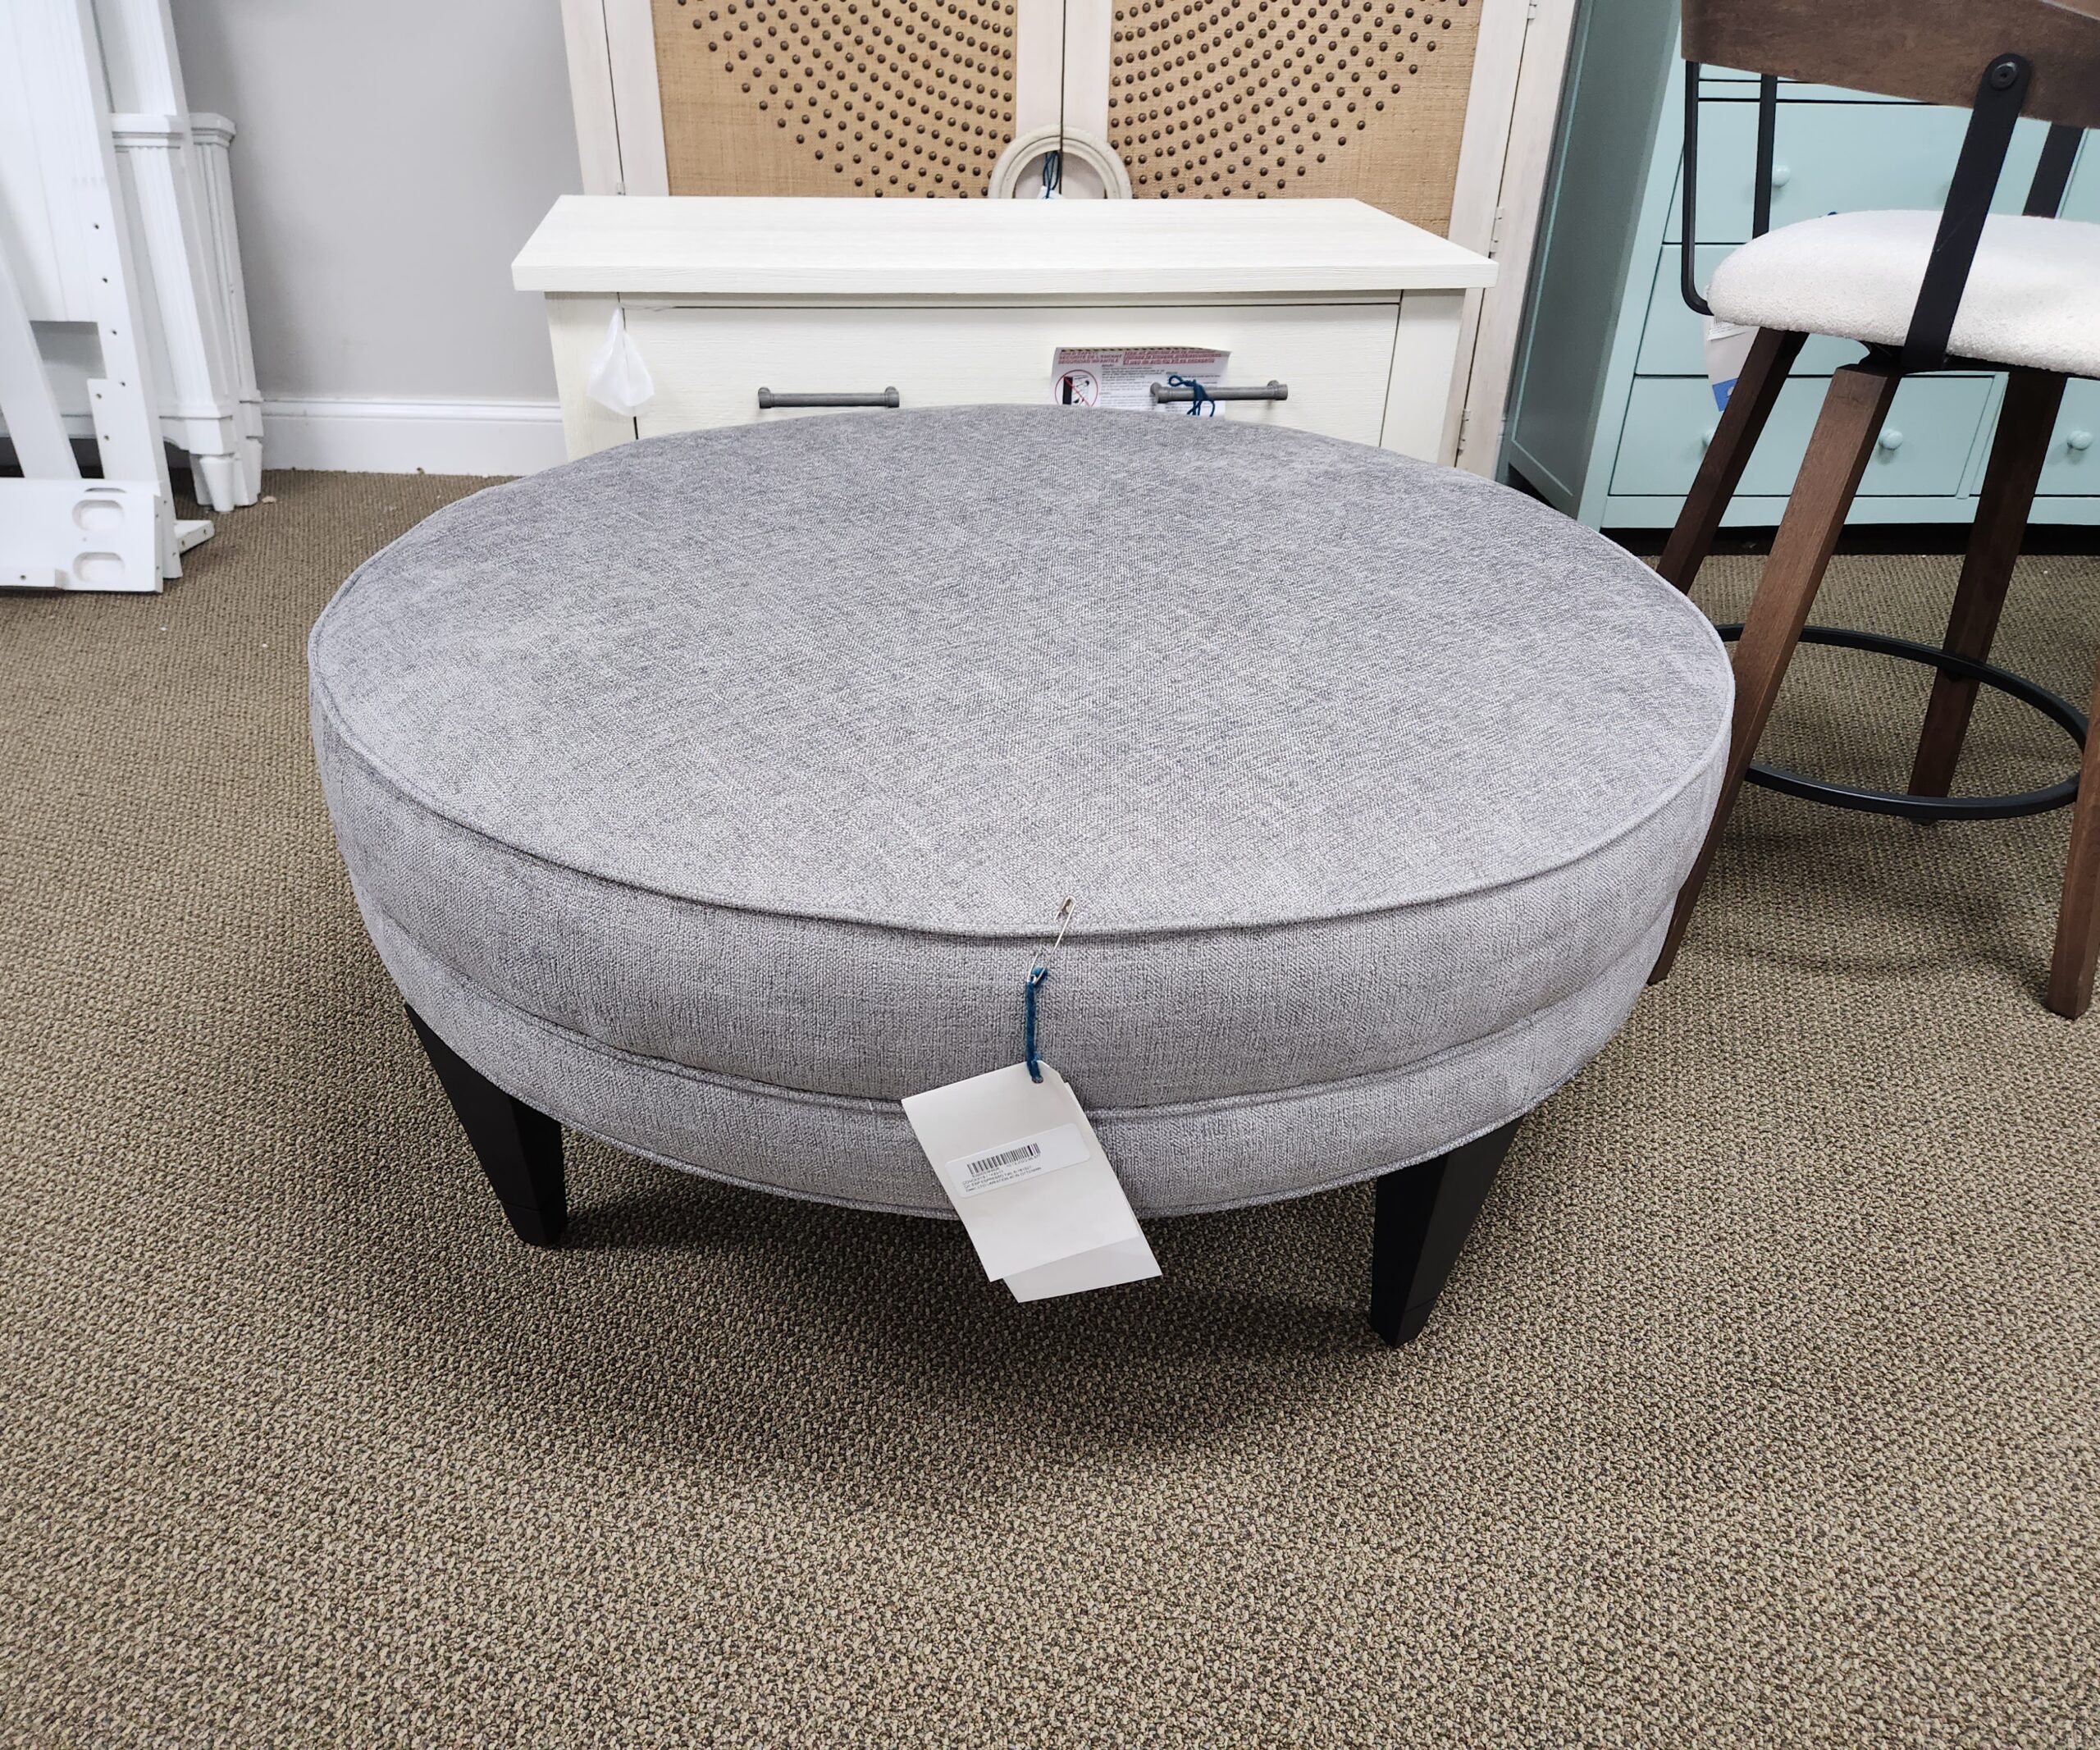 a round ottoman with a price tag on it